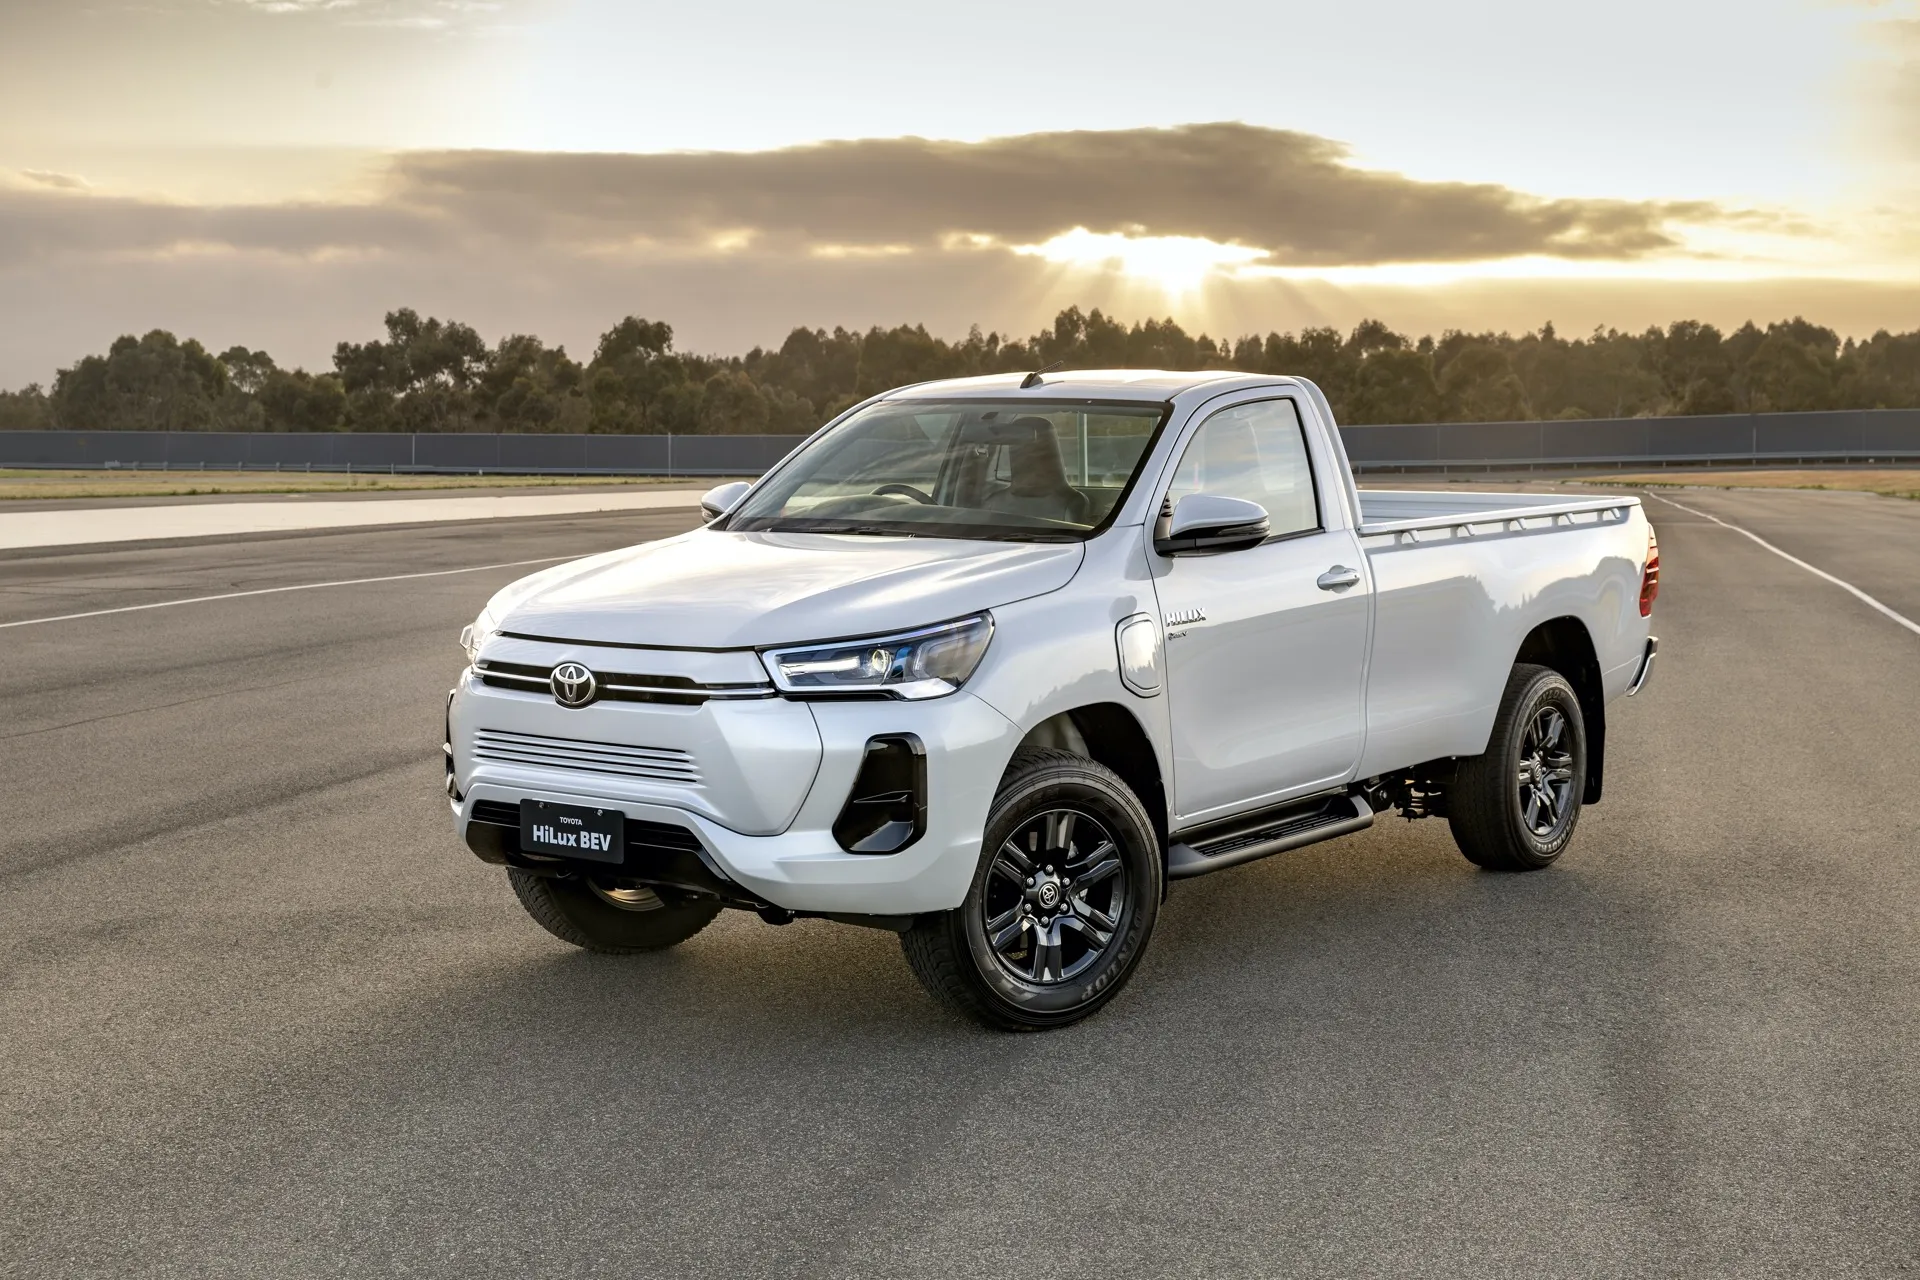 The Hilux will be Toyota’s first electric truck Auto Recent